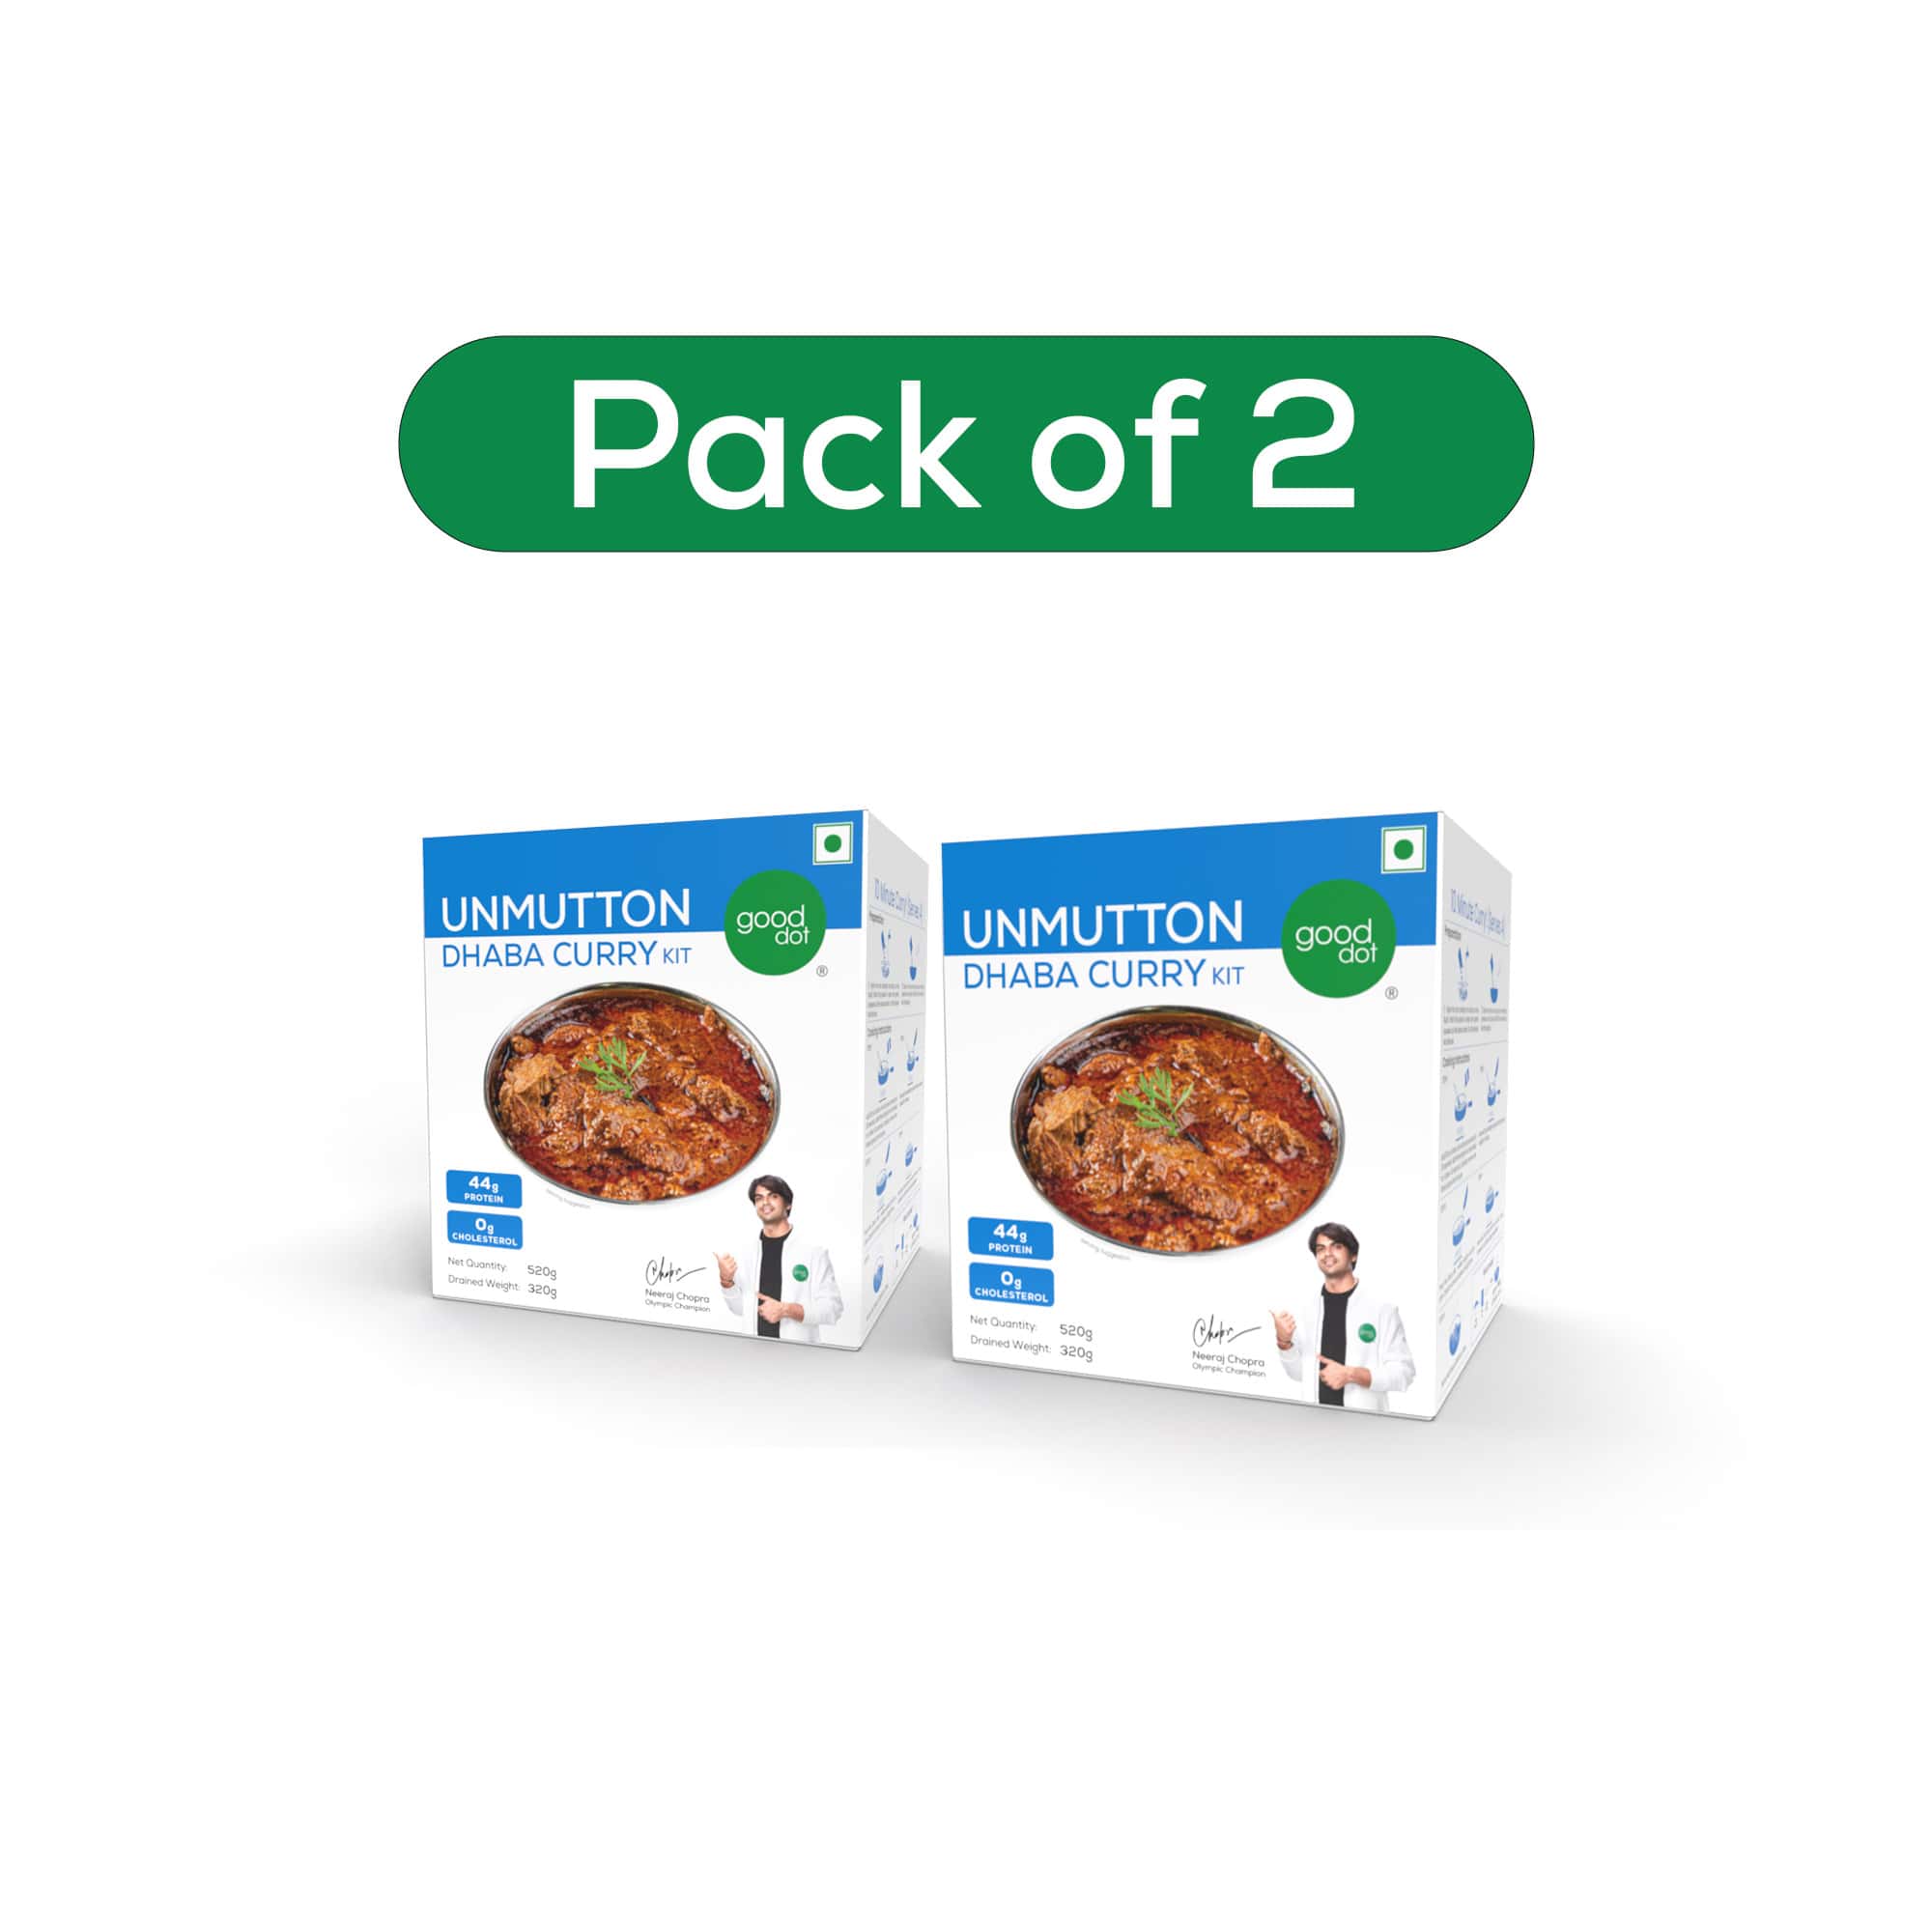 UNMUTTON DHABA CURRY KIT (Pack of 2)